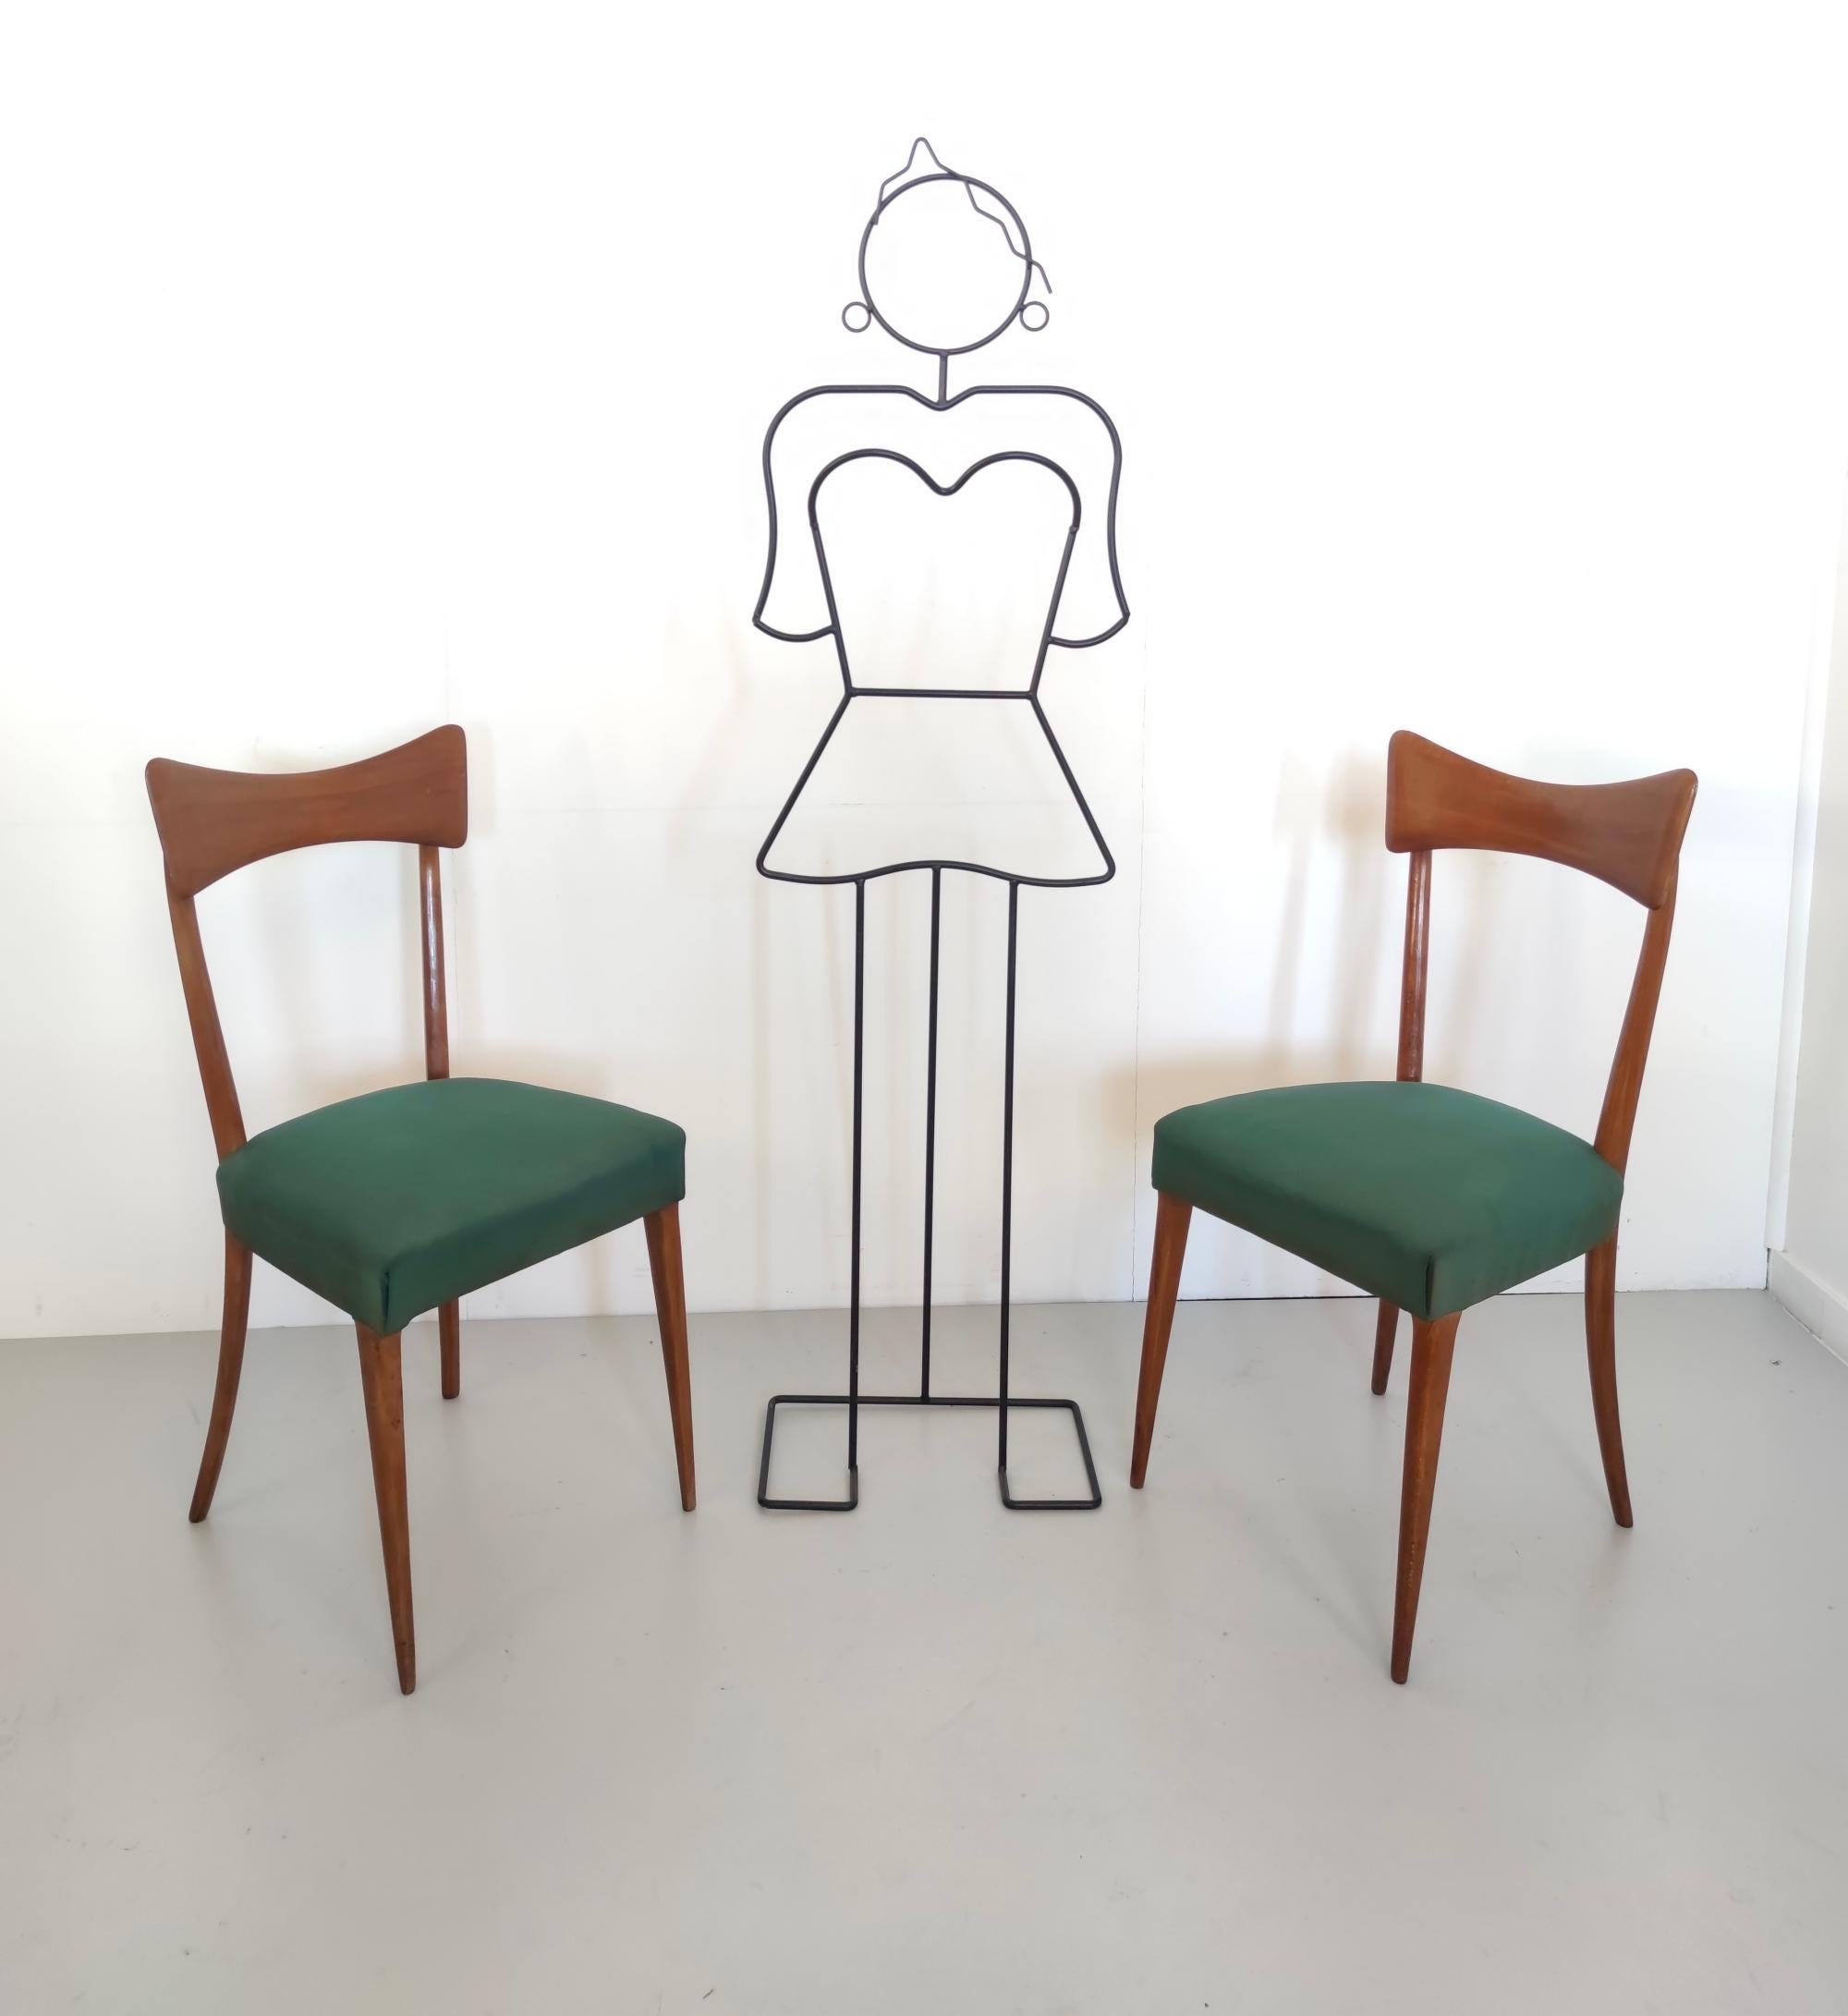 Made in Cantù, Italy, 1955.
These chairs are elegant and a nice iconic model of the Italian design. 
They feature a beech frame and a dark green suede upholstery. 
They might show slight traces of use since they're vintage, but they can be